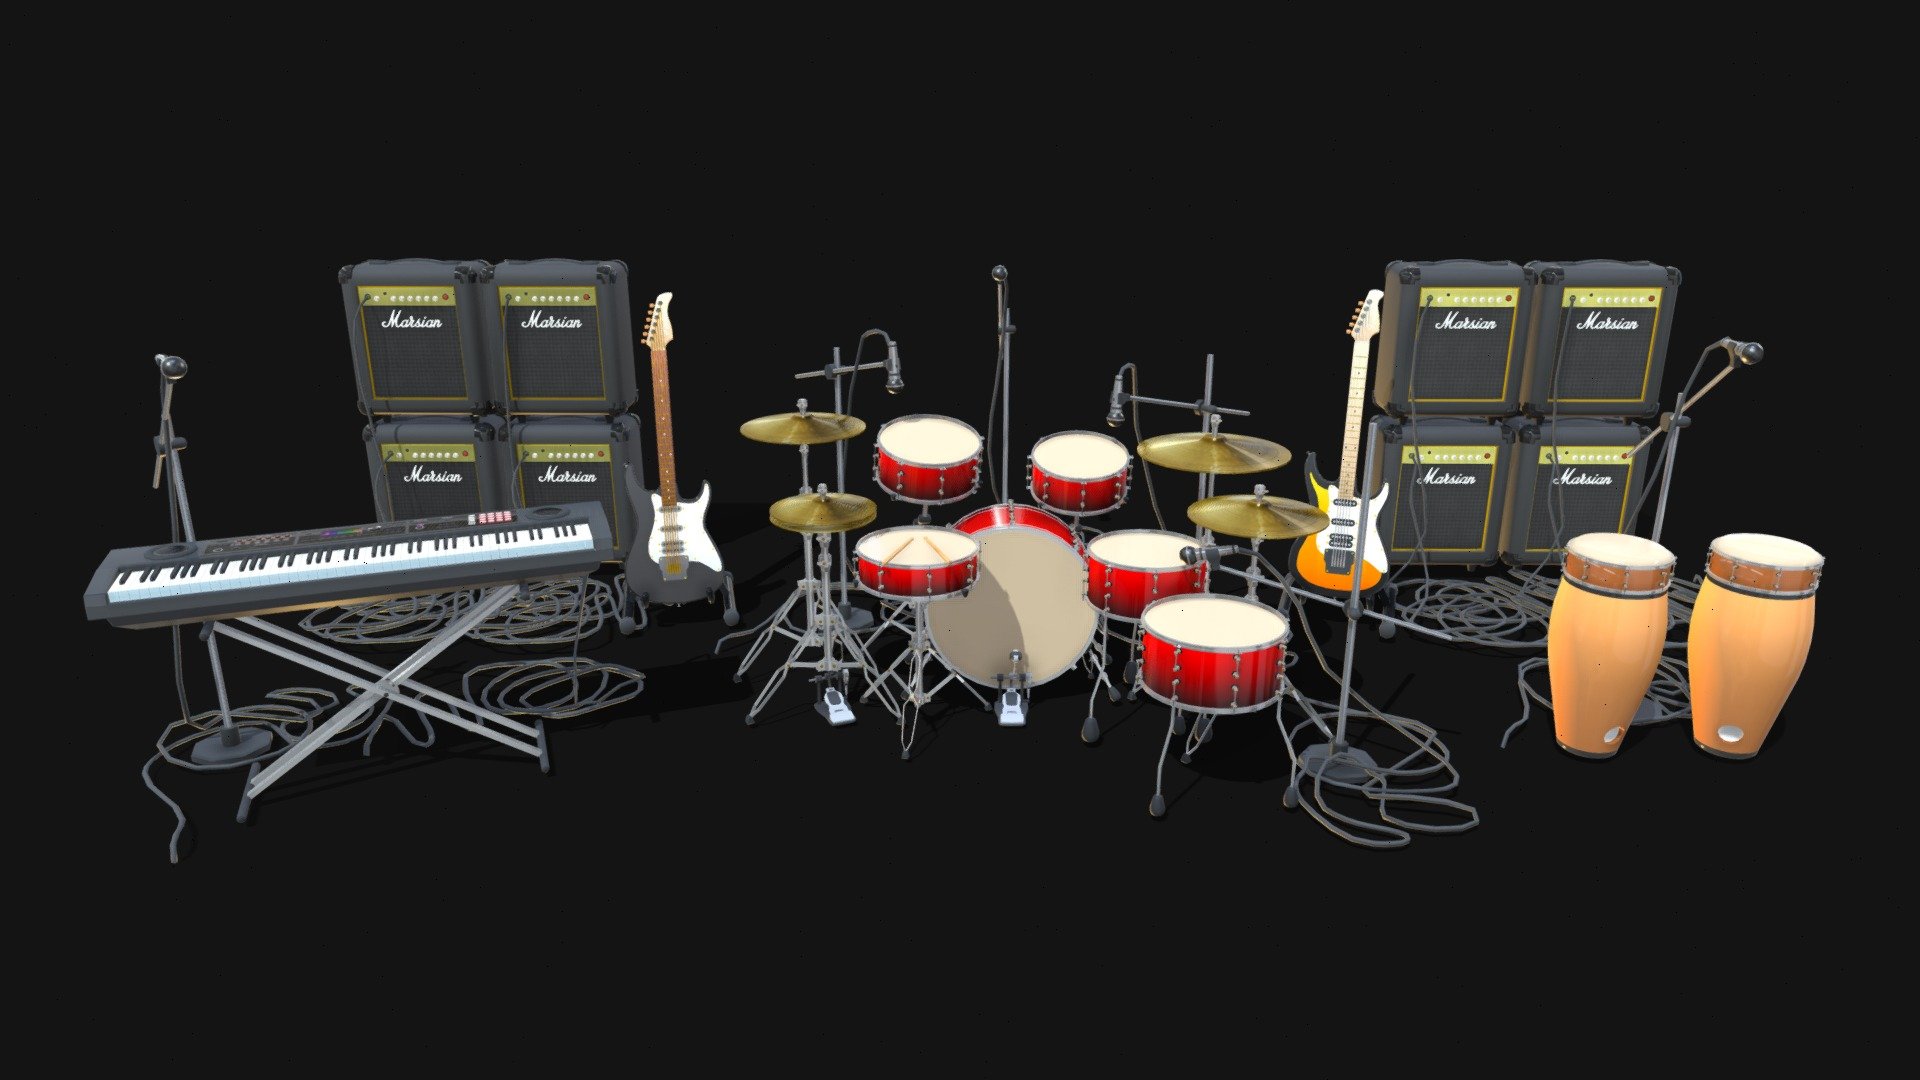 rock and roll instrument pack
-Drum Set
-Guitar Bass
-Guitar rithm
-Keyboard Piano
-Congas
-Amplifiers
-Microphones
and tons of wires

this pack is made in blender, hope you like it ^_^ - Rock Instrument Pack - Buy Royalty Free 3D model by LowPolyBoy 3d model